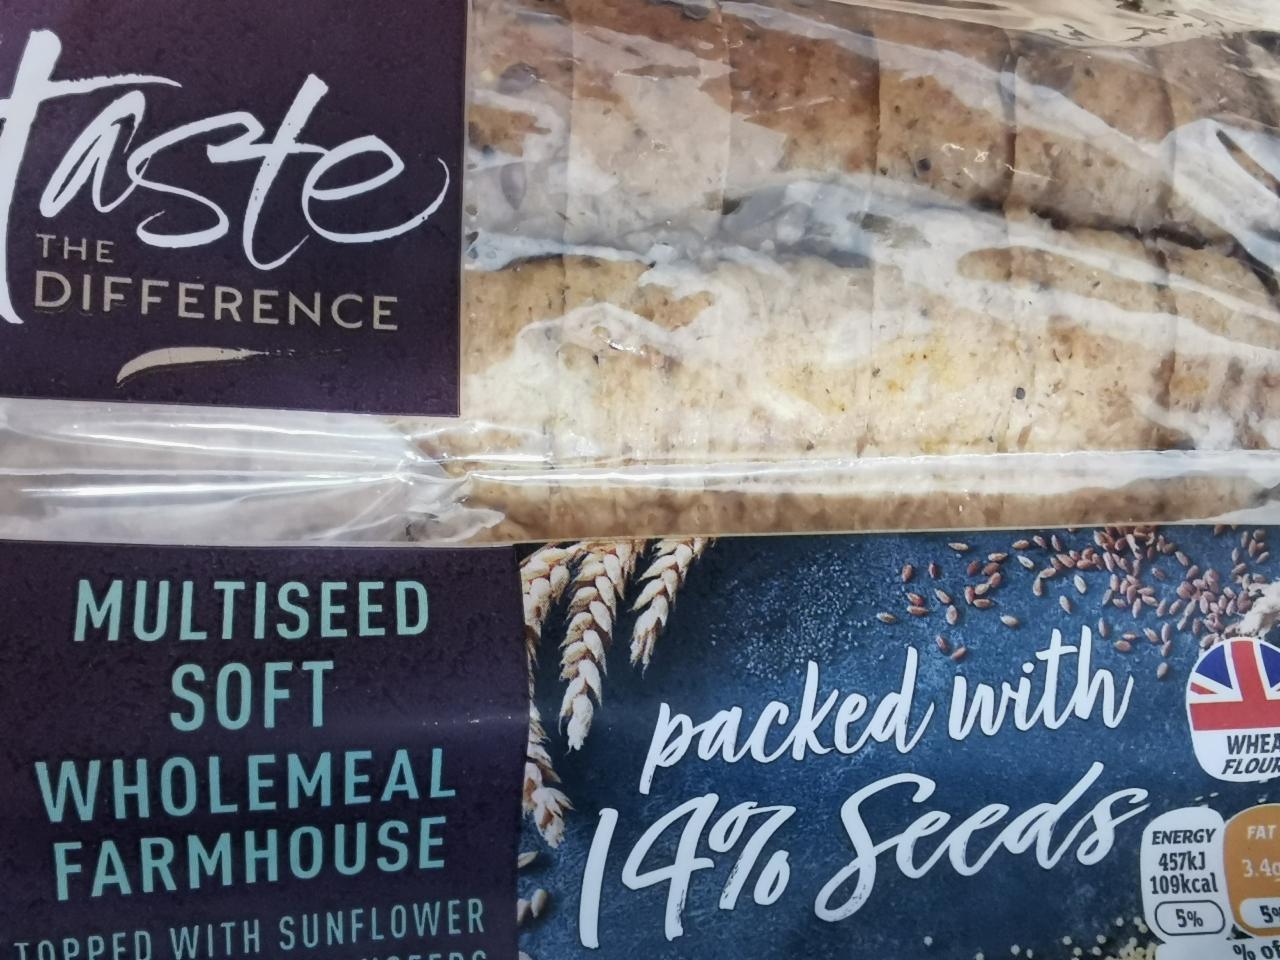 Fotografie - Taste the Difference Multiseed Soft Wholemeal Farmhouse